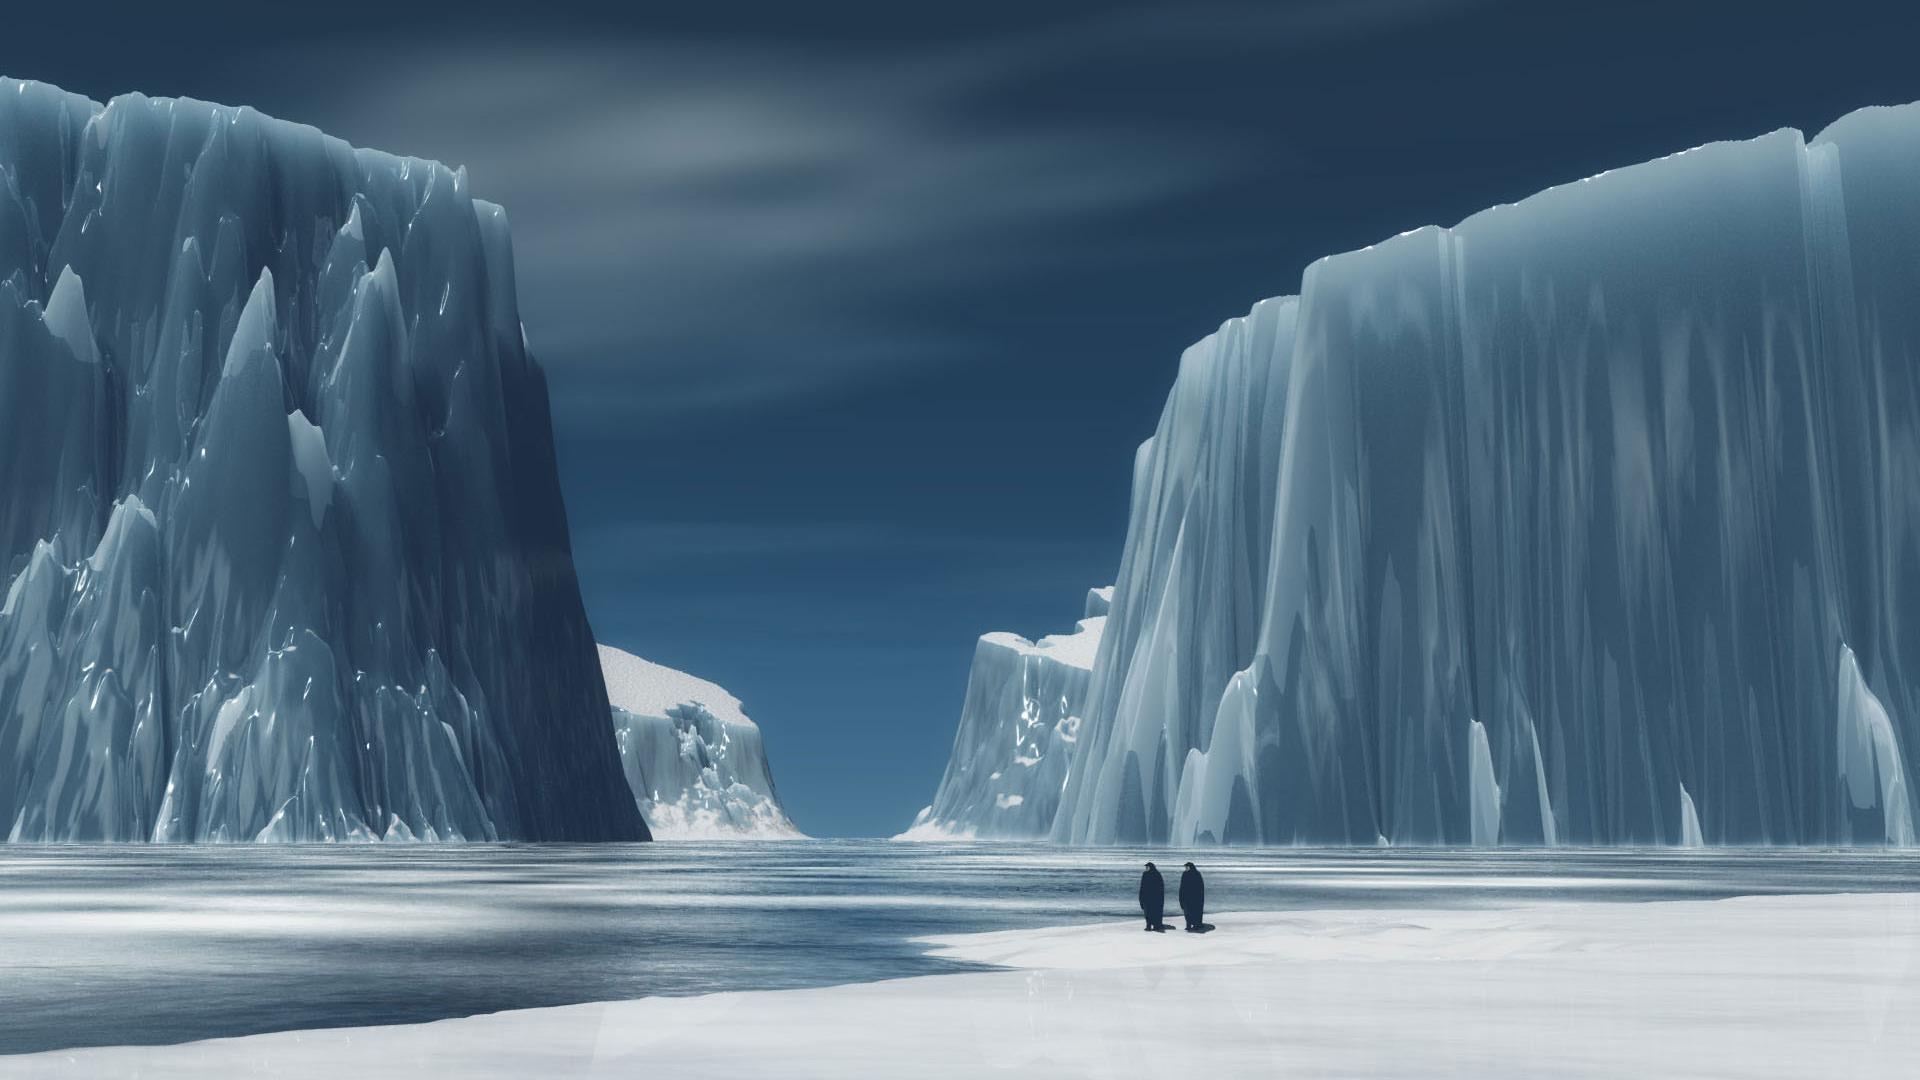 The Sunvo Glacier Desktop Background Widescreen and HD background